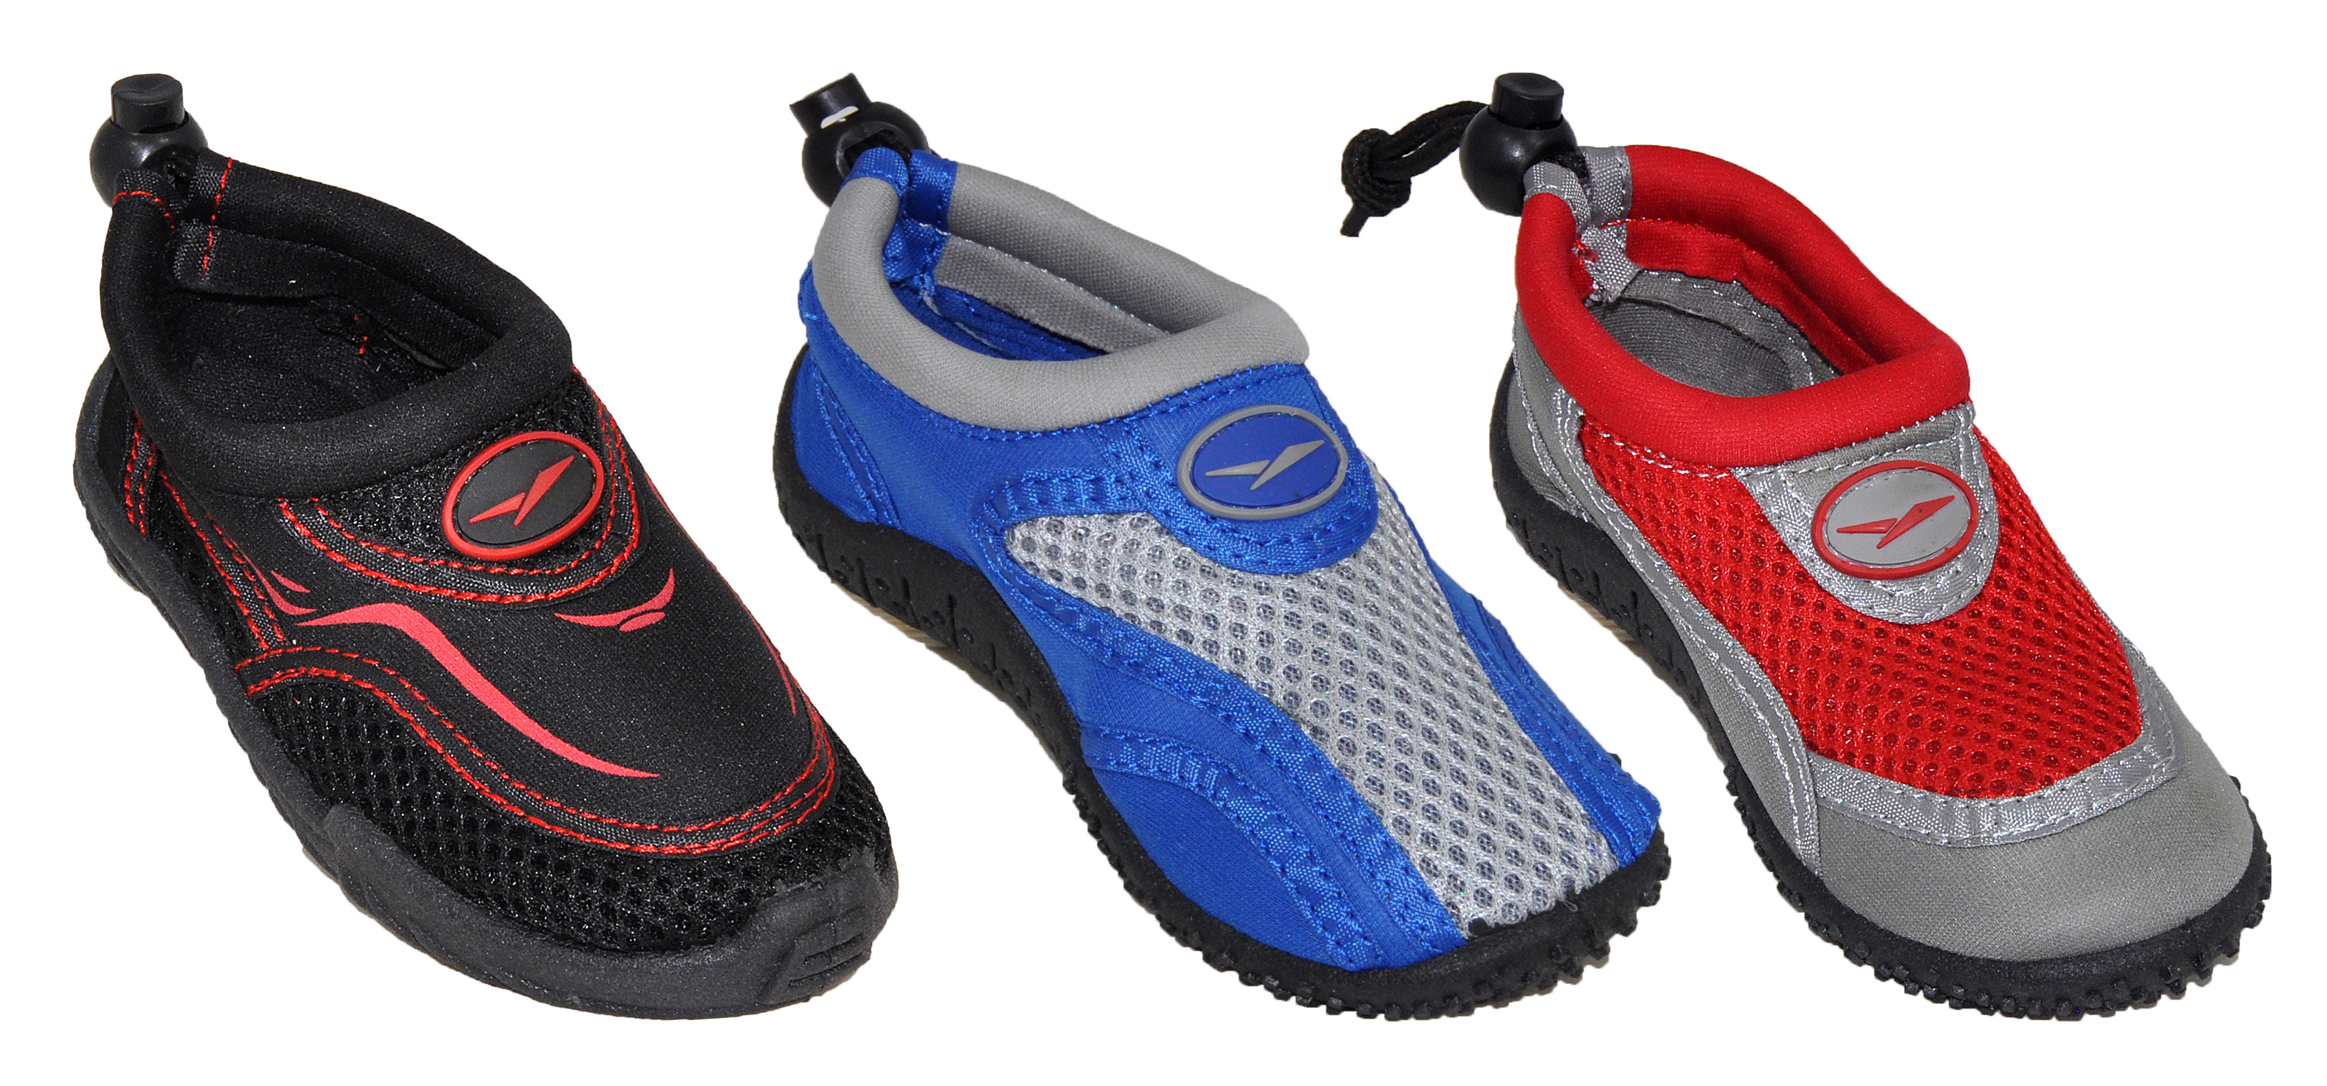 Toddler Boy's & Girl's Aqua SHOES - Assorted Colors - Sizes 5-10